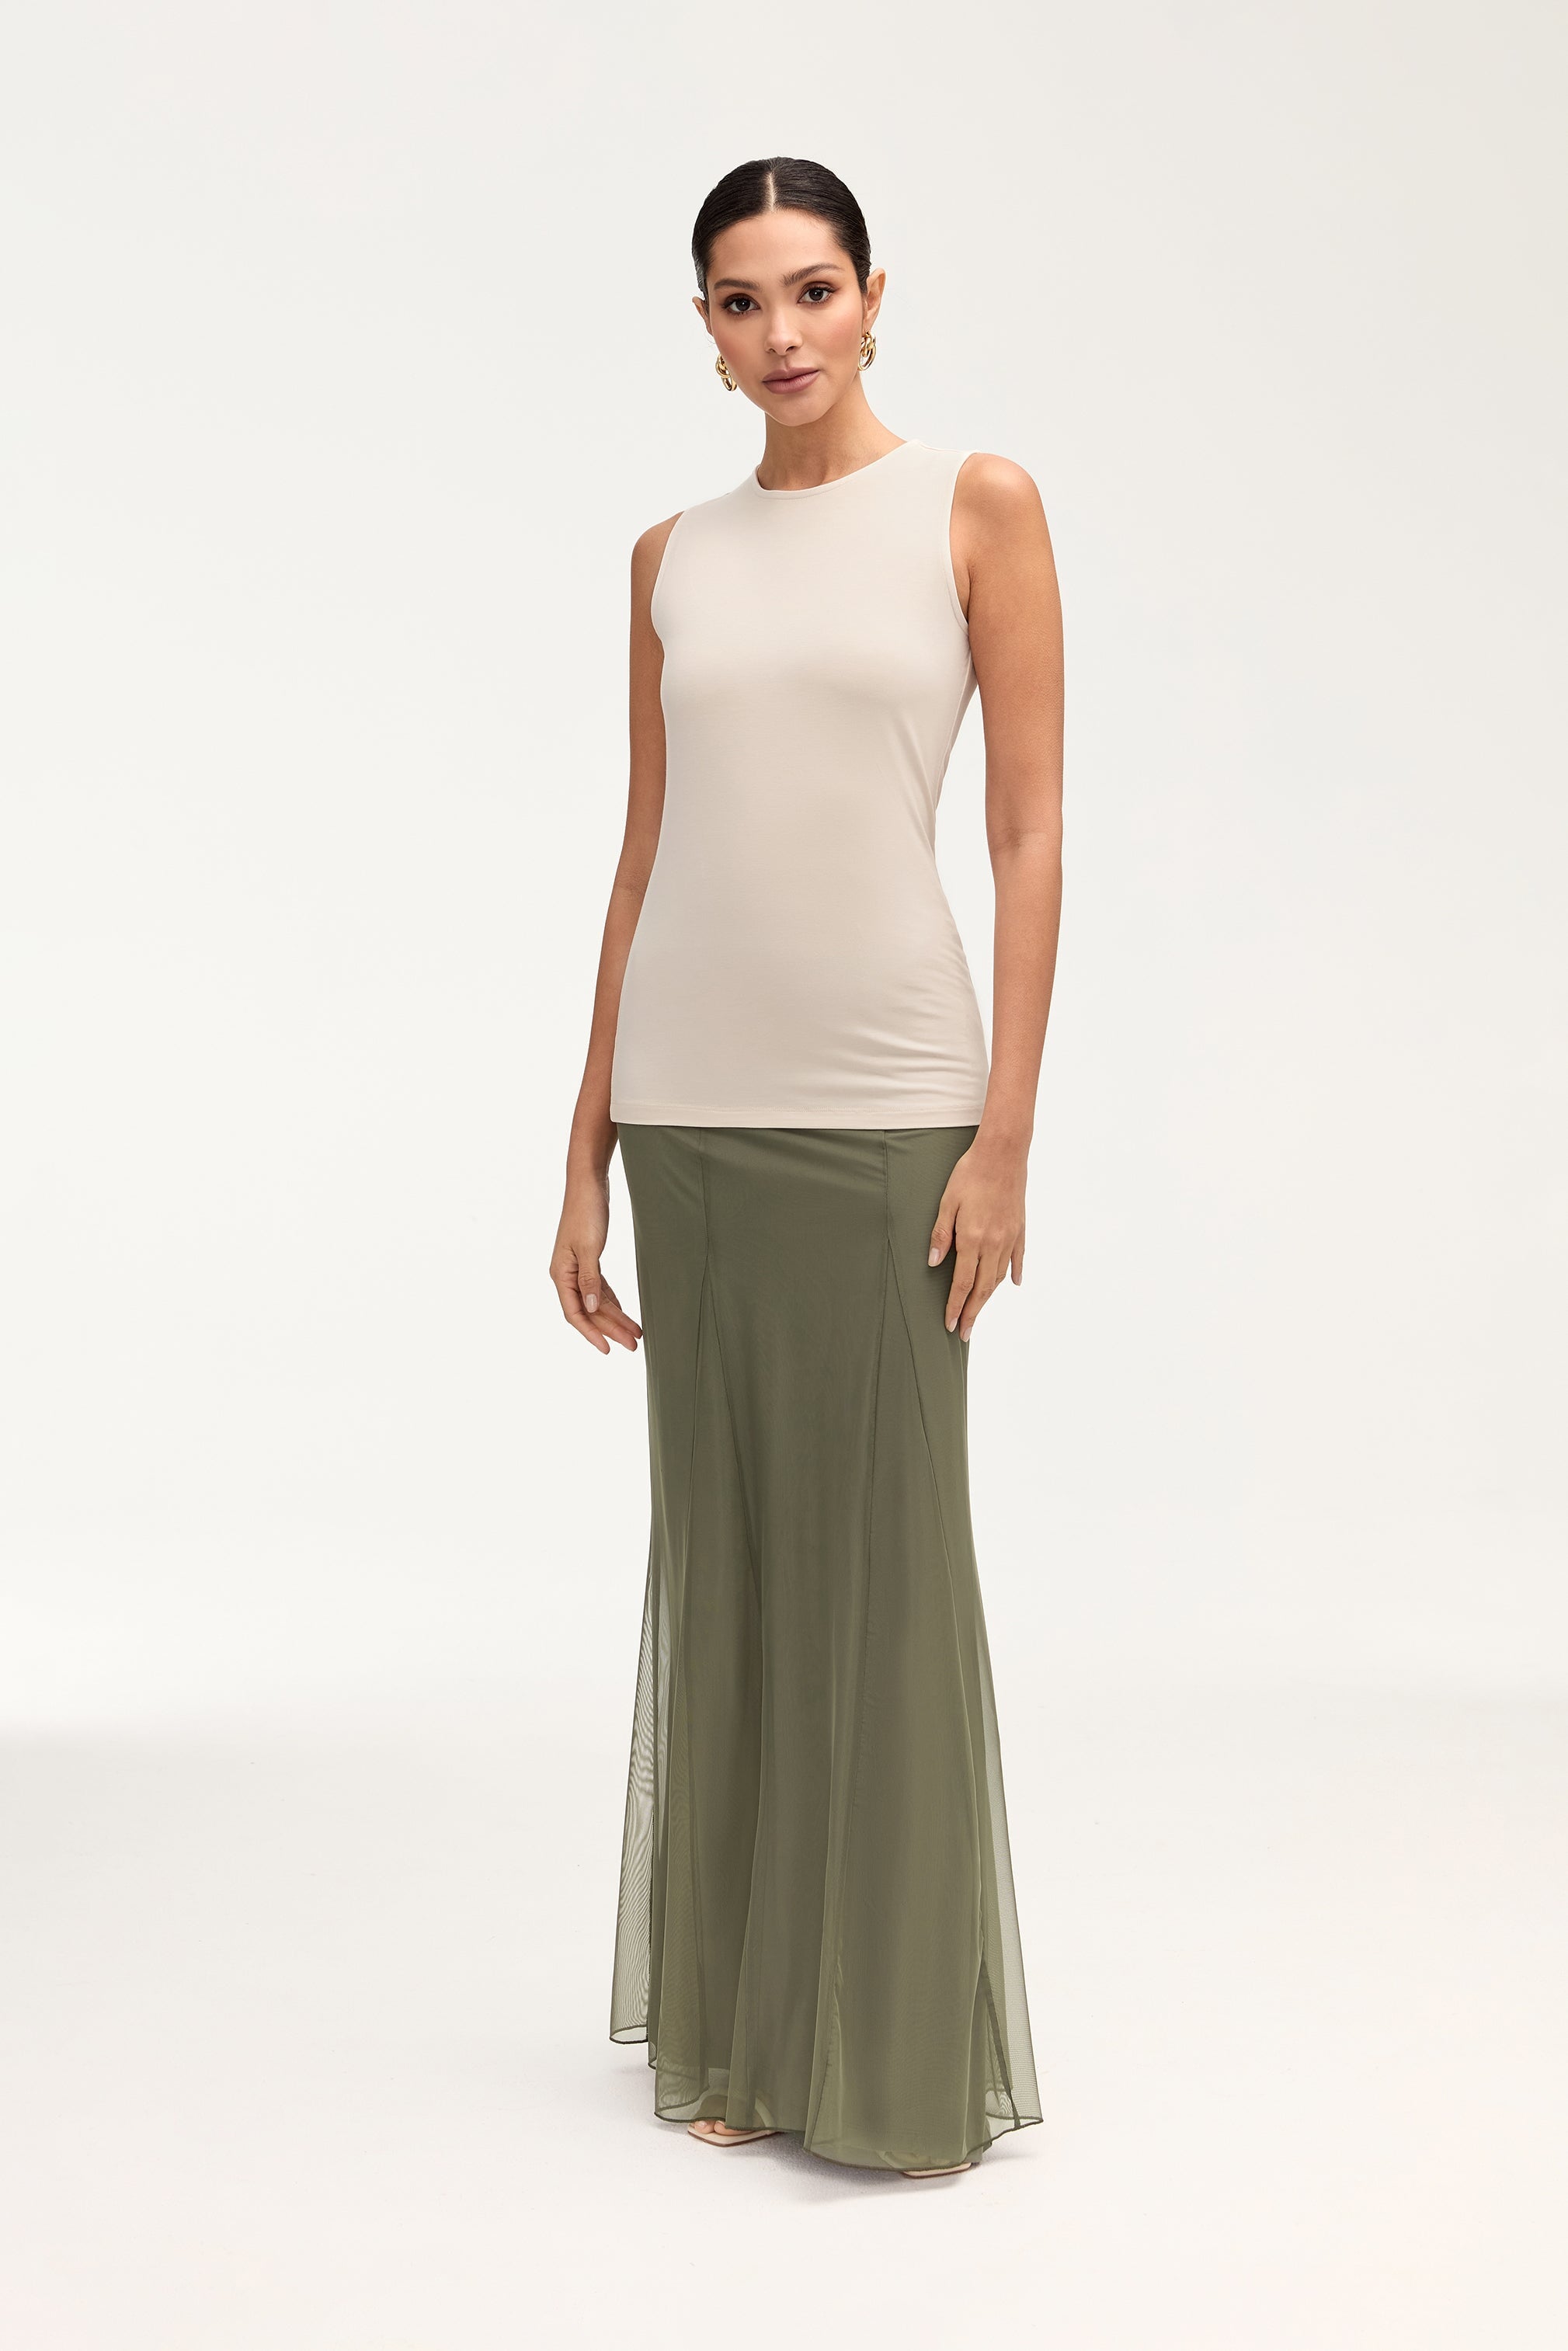 Labina Jersey Two Piece Tie Front Top - Stone Clothing Veiled 